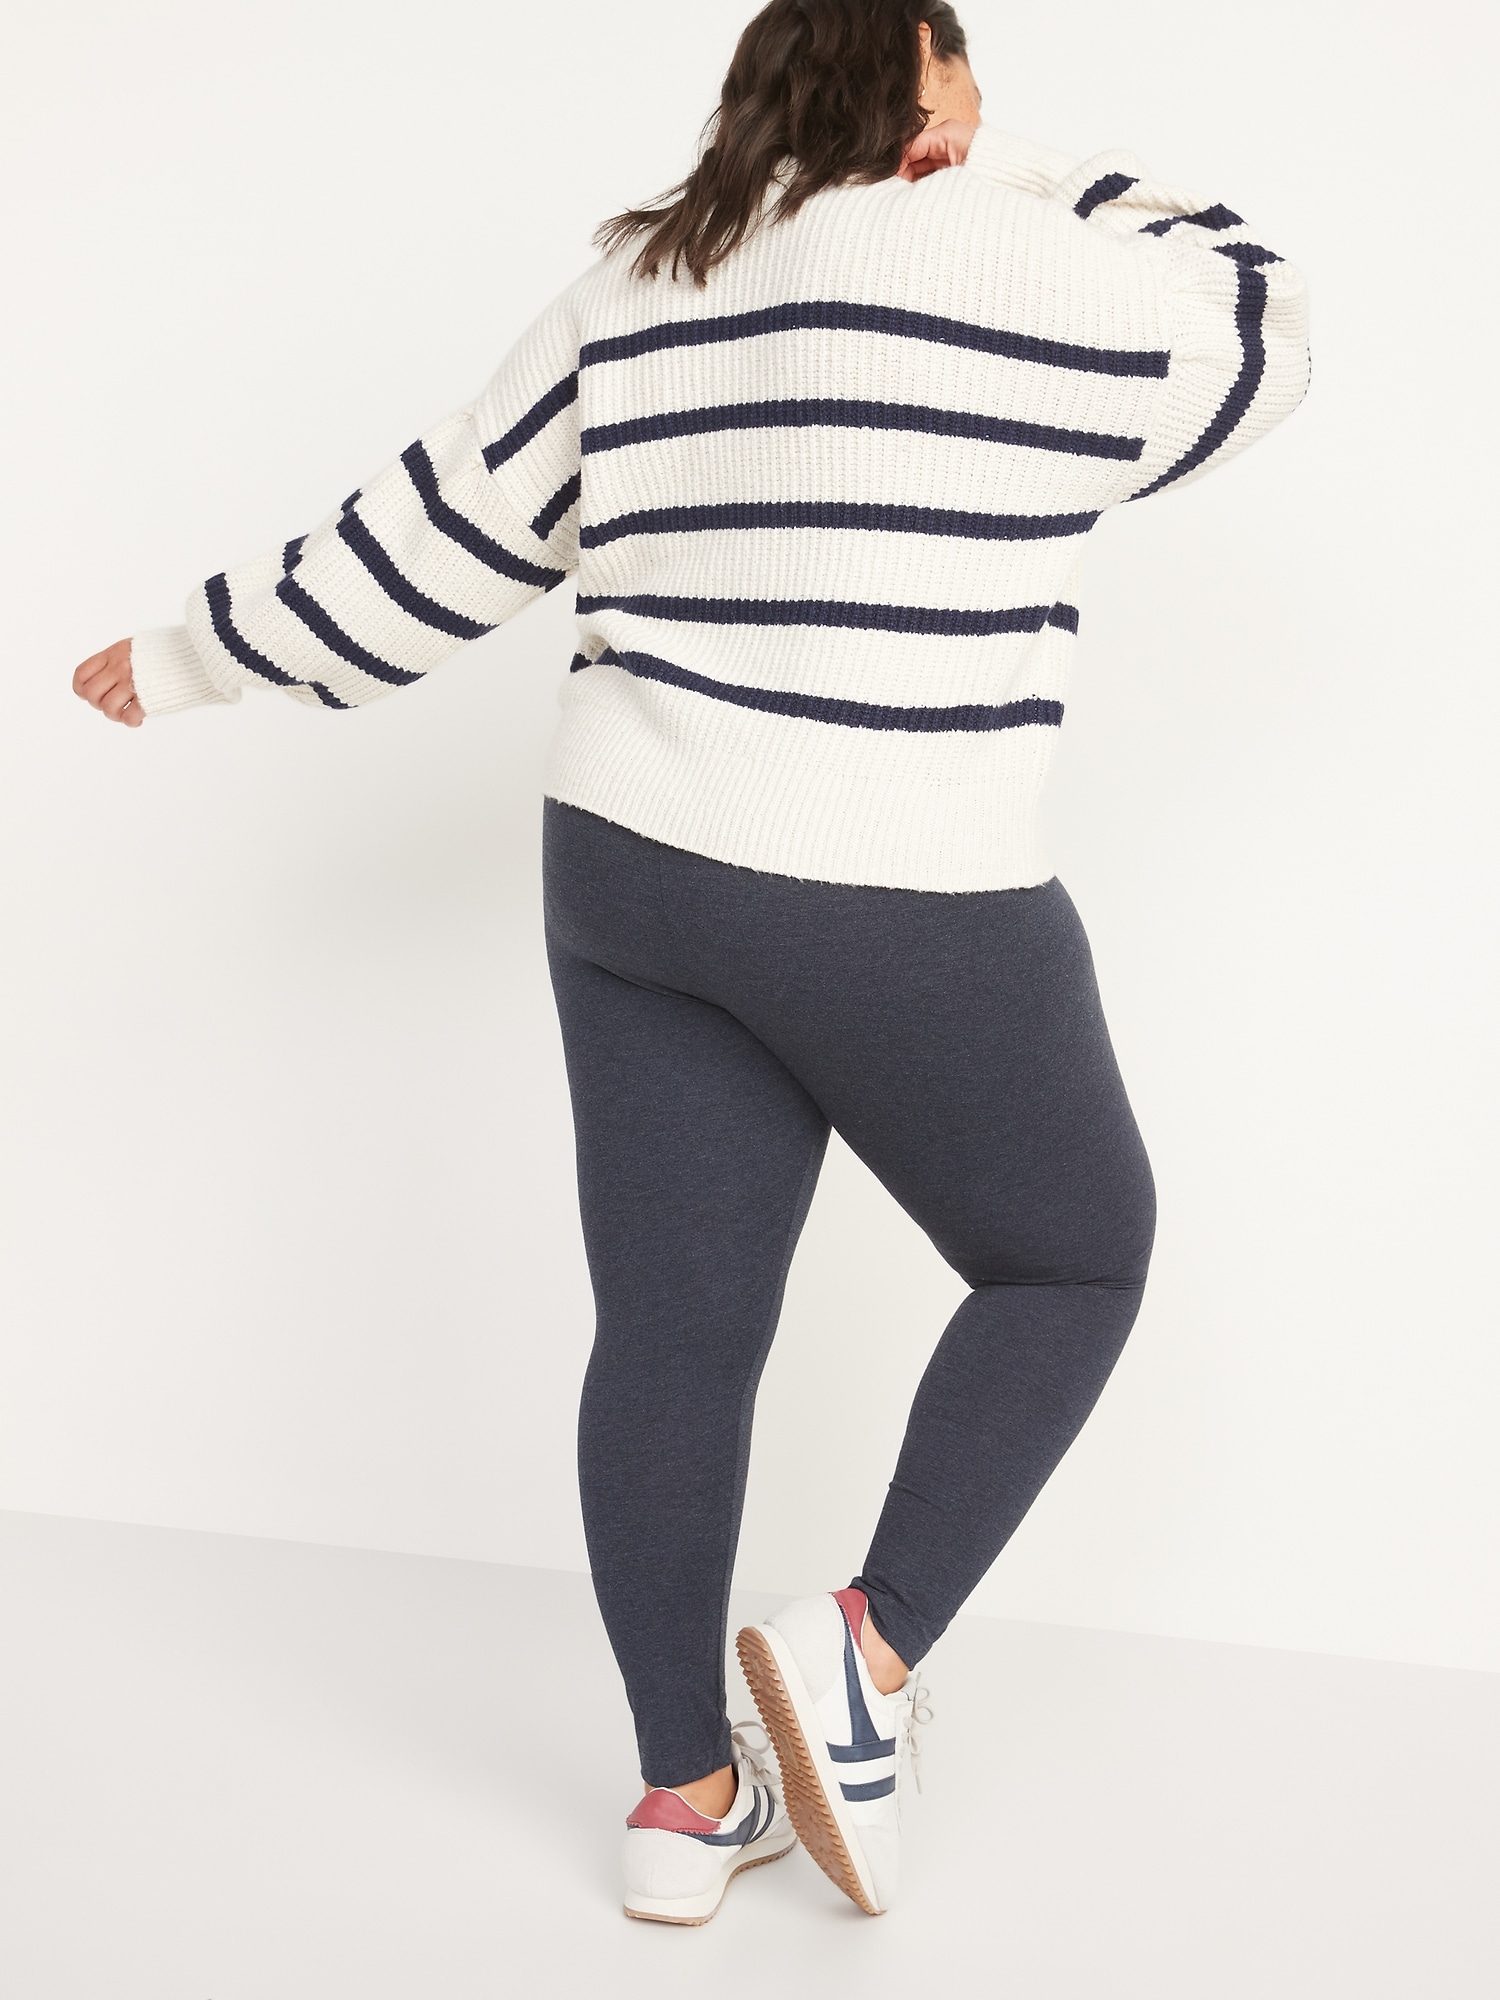 Old Navy Mid-Rise Jersey Leggings 2-Pack, 71 Old Navy Pieces You'll Want  to Get on Sale This Labour Day Weekend (Like $20 Jeans!)